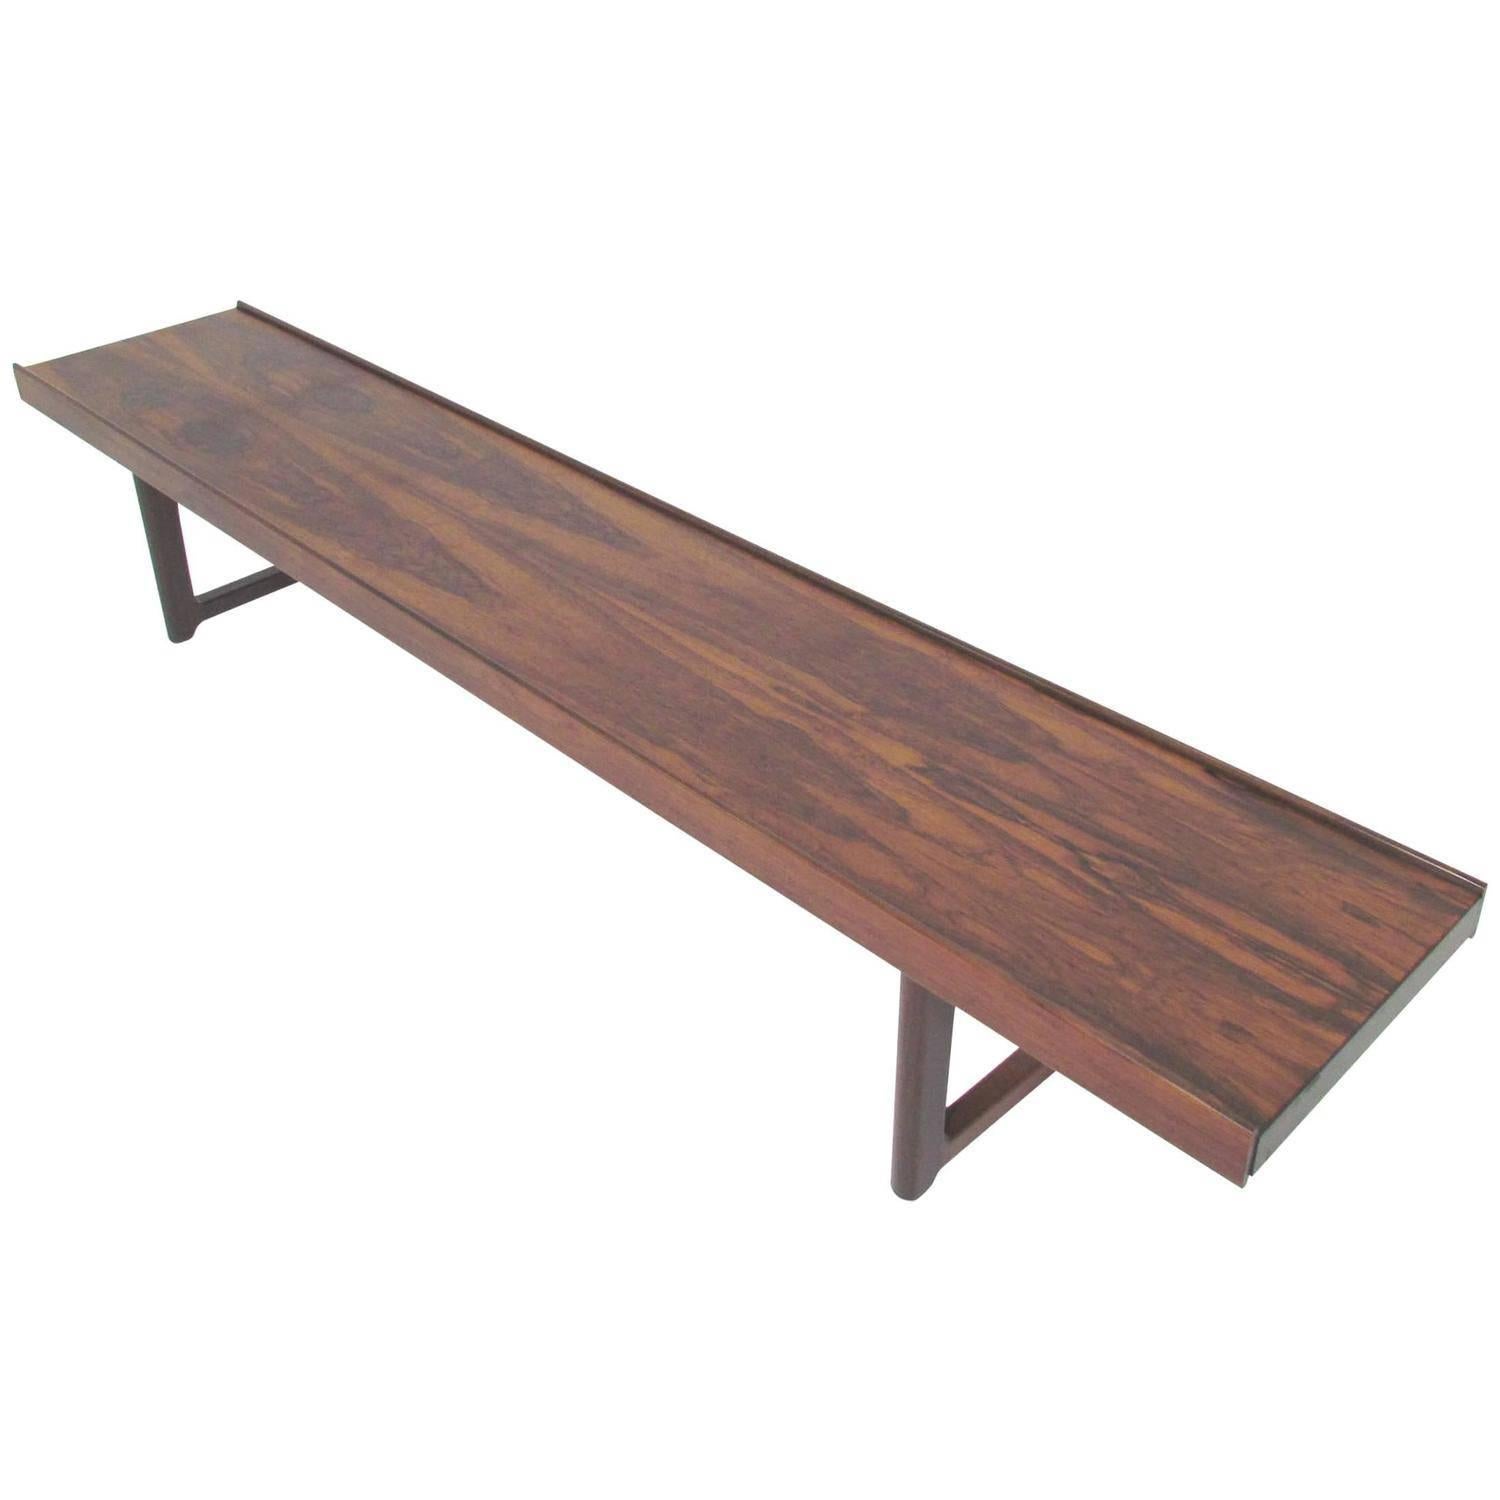 Pair of long benches or side tables model Krobo in rosewood designed by Torbjørn Afdal. This is the long version (200cm).

Manufactured in Norway by Bruksbo, circa 1960.

Very good vintage condition,

Also sold individually.